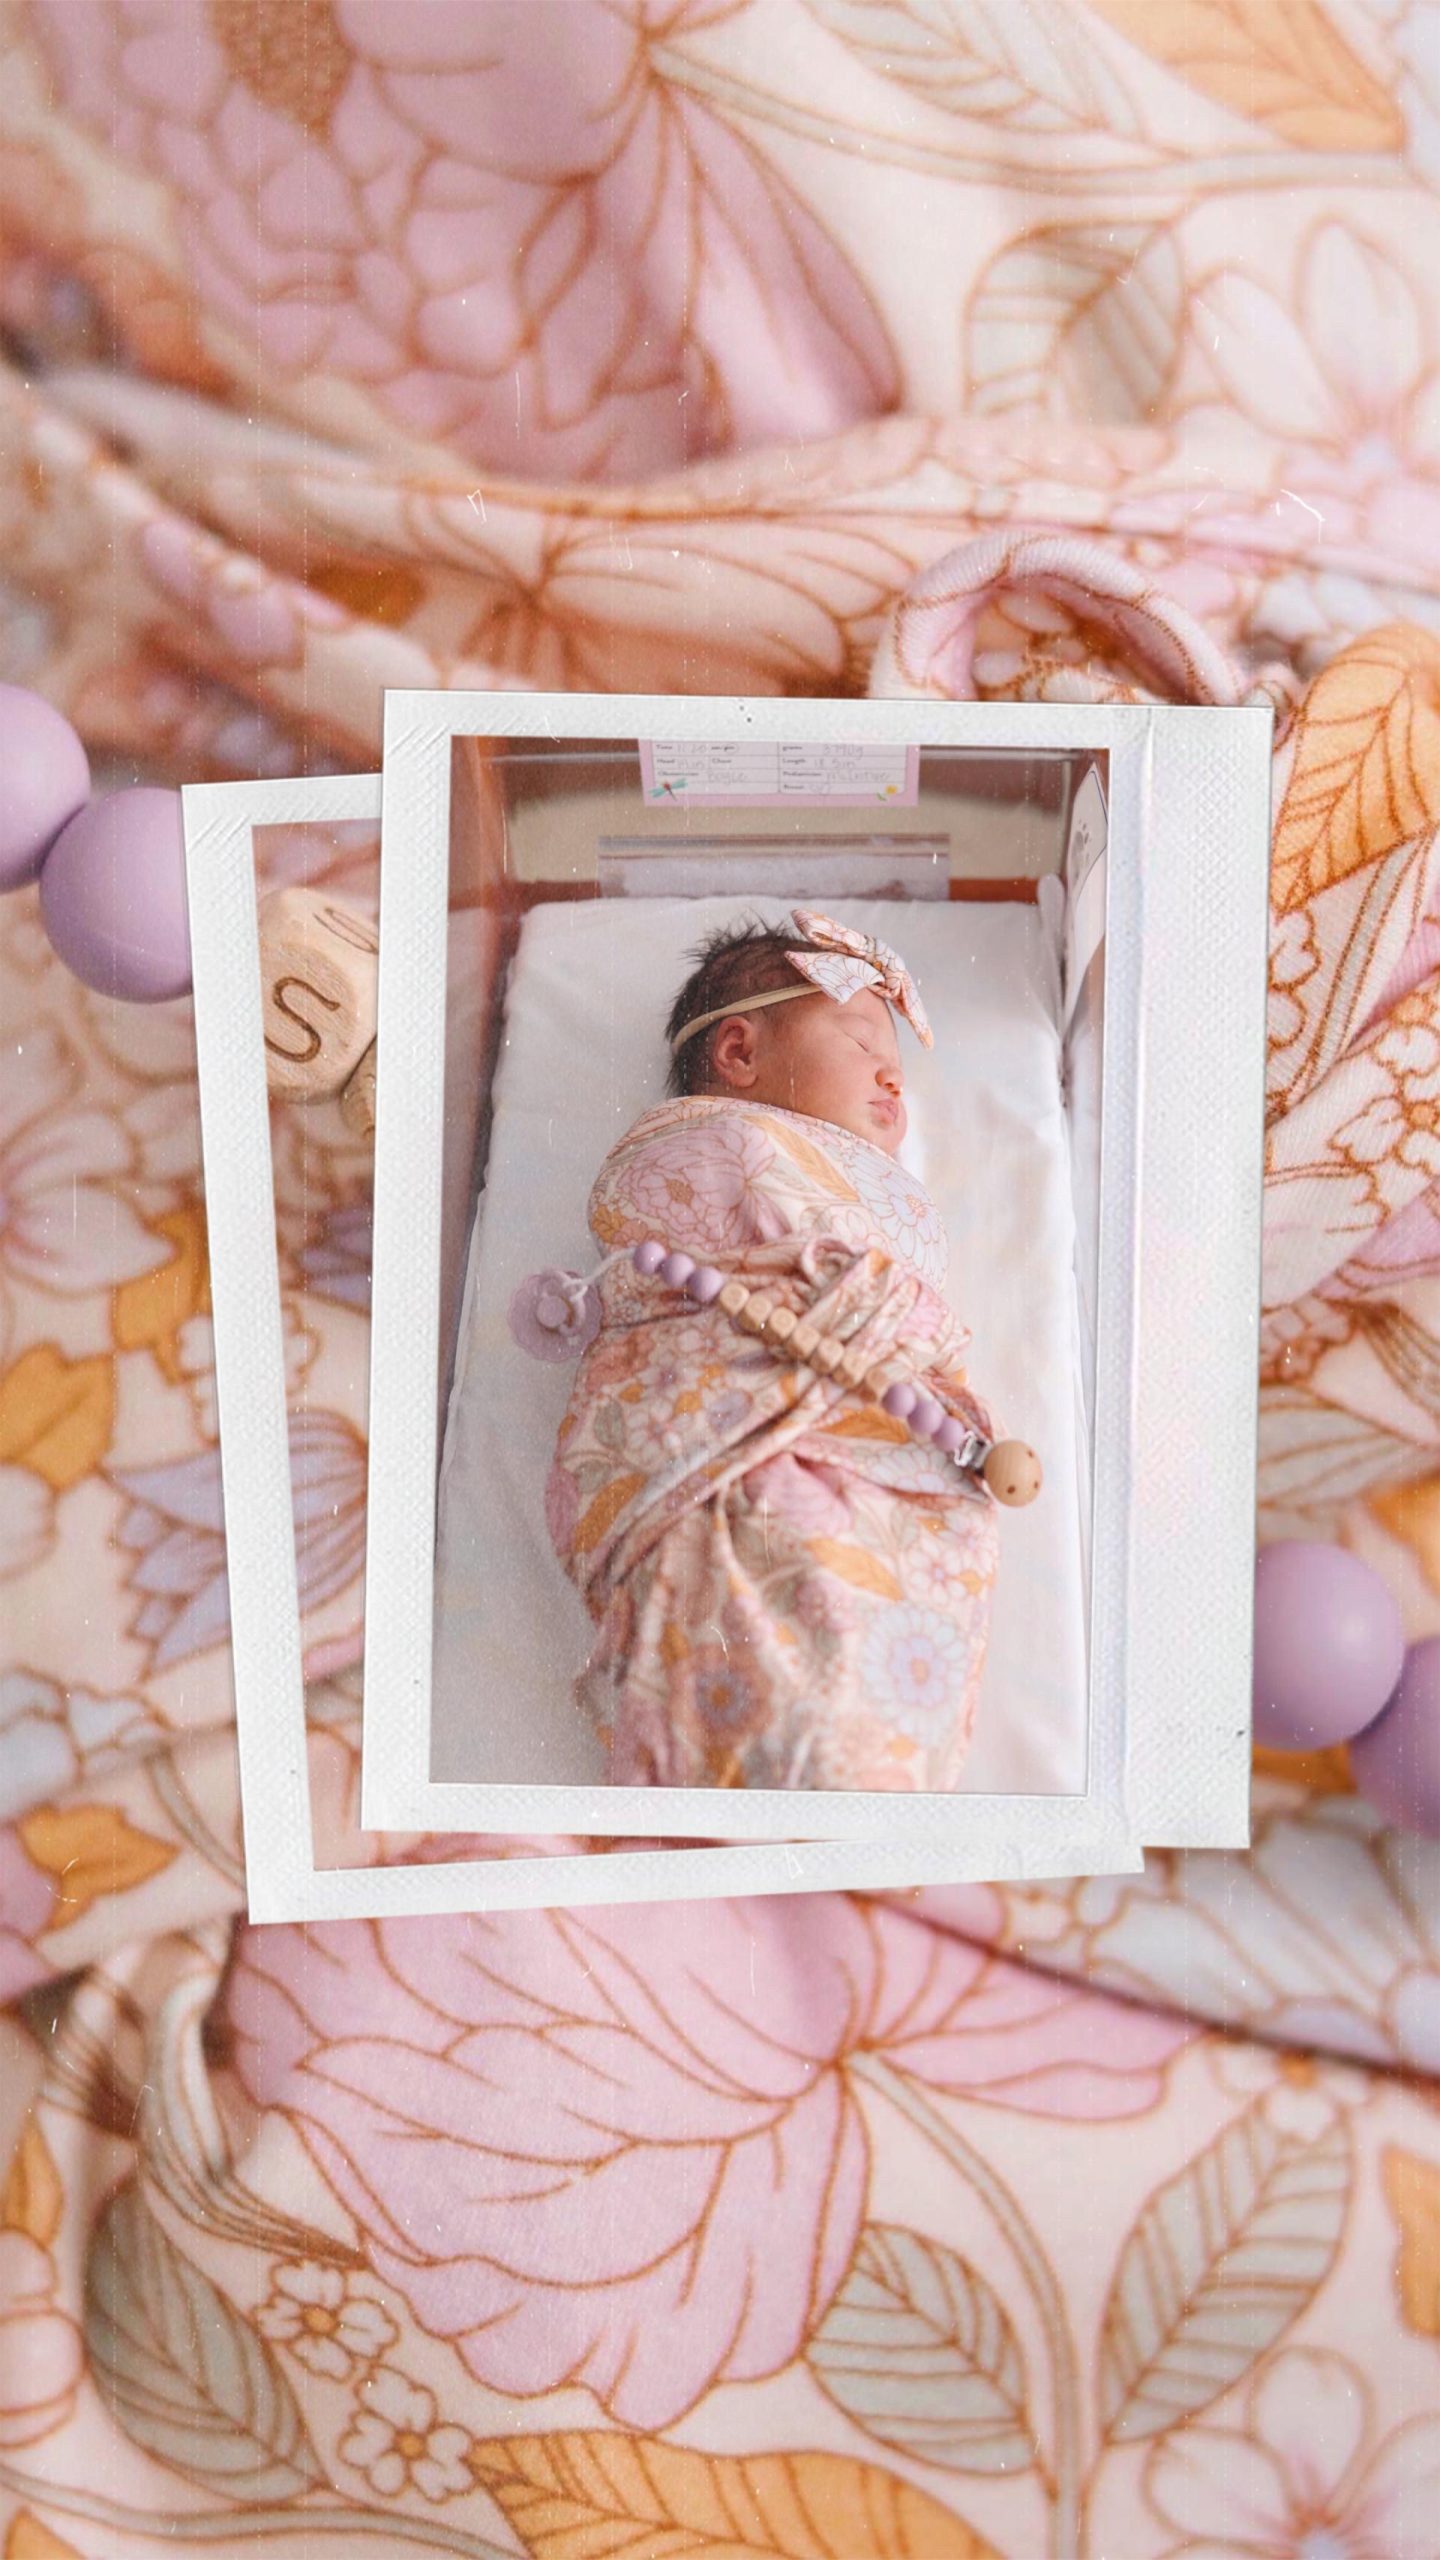 Our Second Baby is Here! Her Name + Our Birth Story